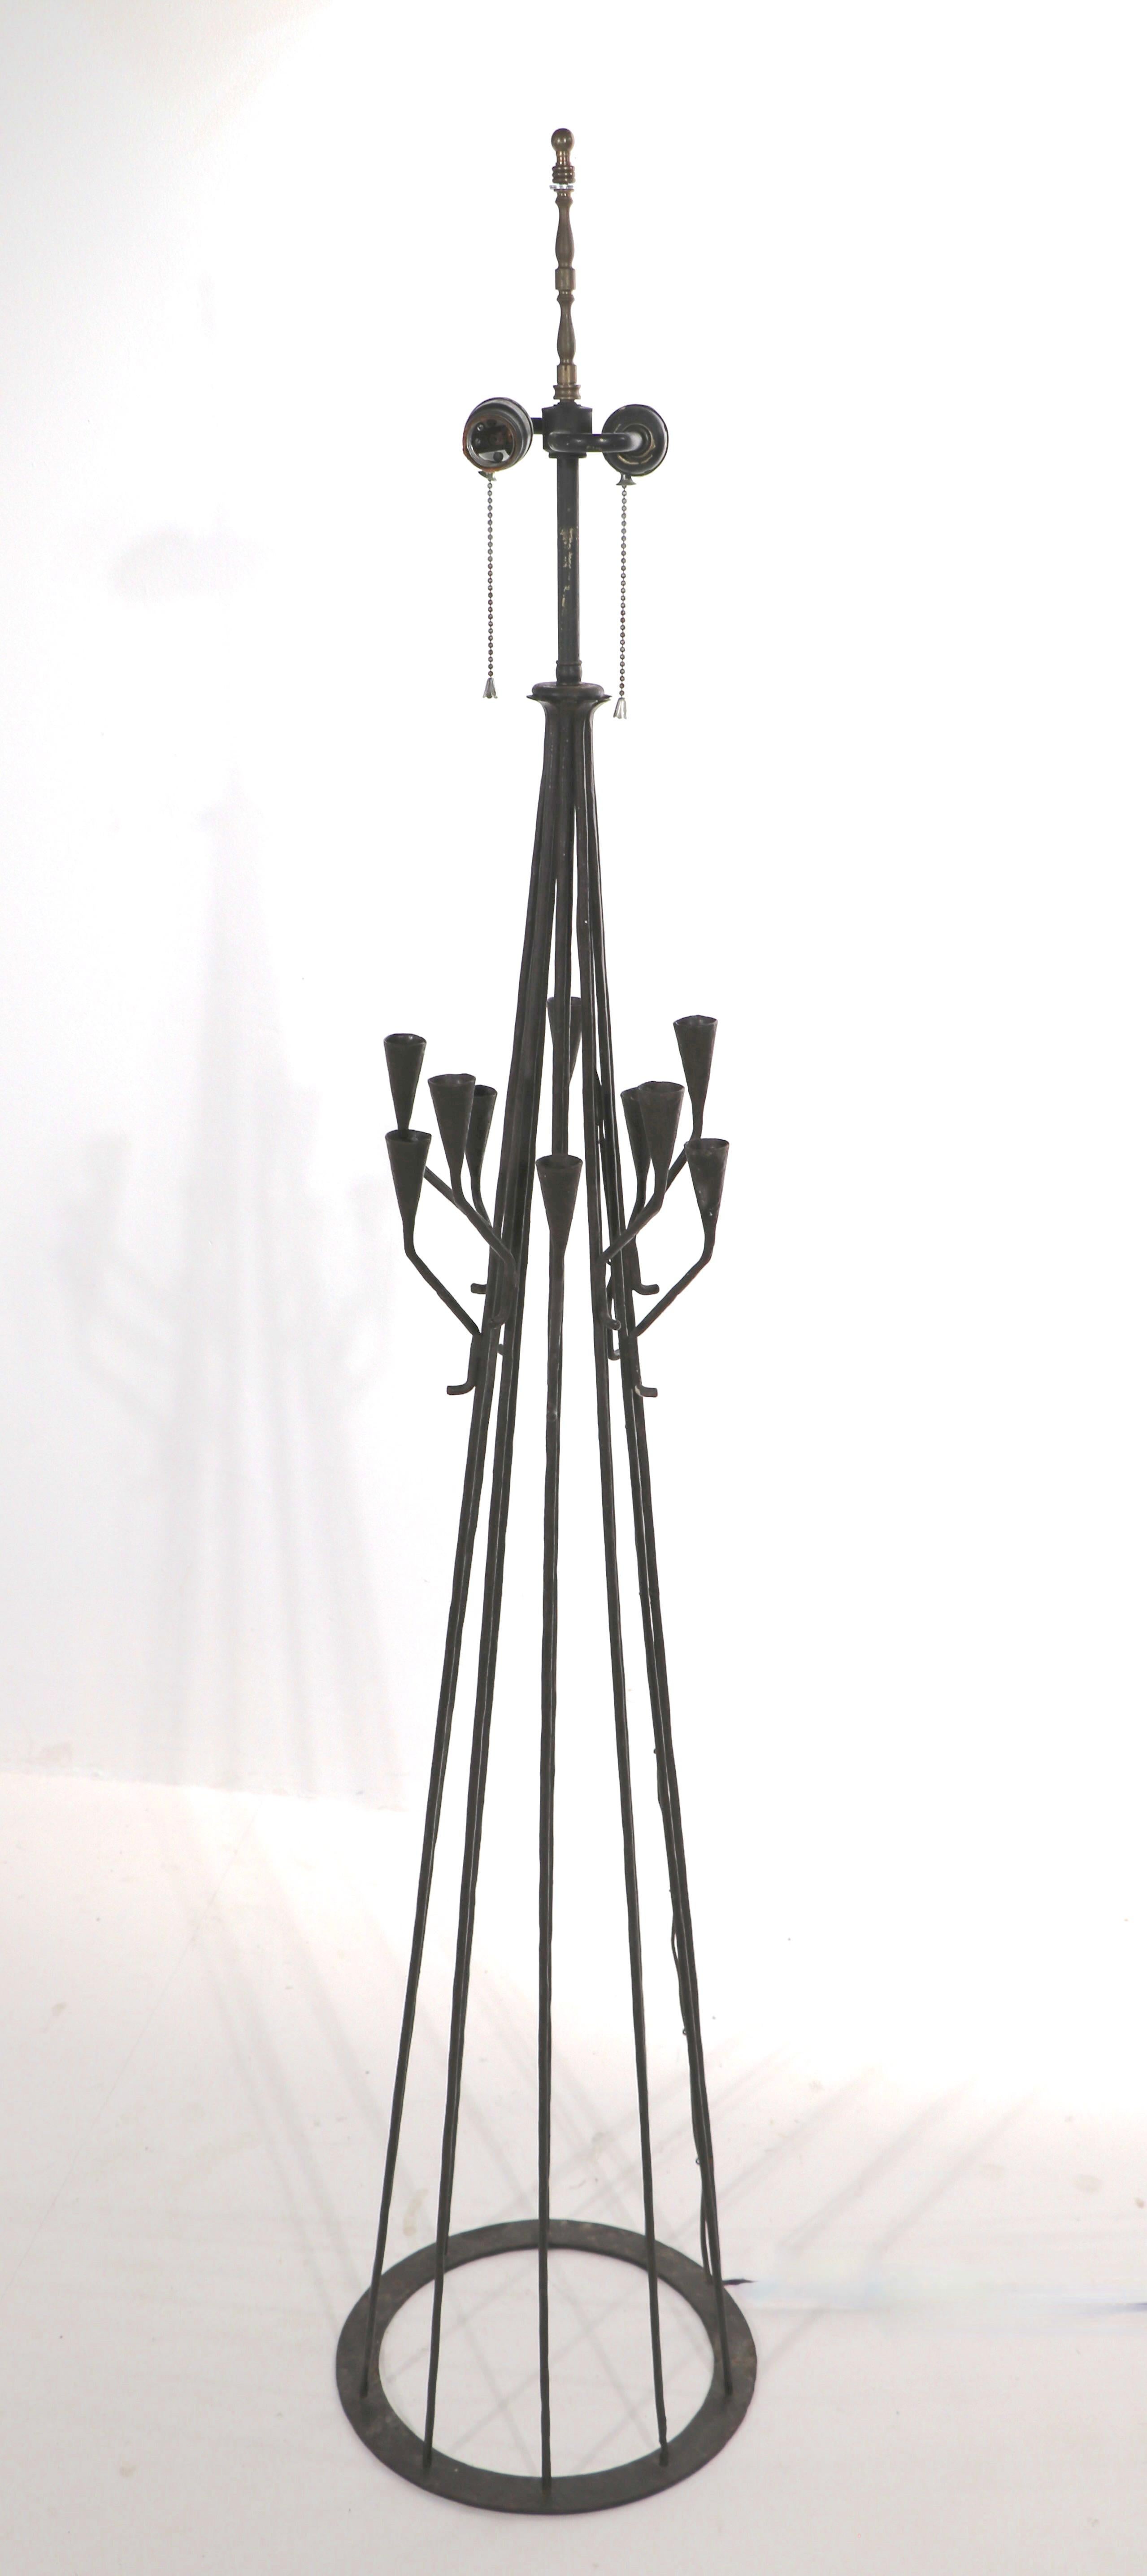 Interesting wrought iron floor lamp, having candle cup arms which extend off main center piece. The lamp has two standard size sockets ( working ). Marked Made in Portugal, impressed on circular metal base. Shade not included.